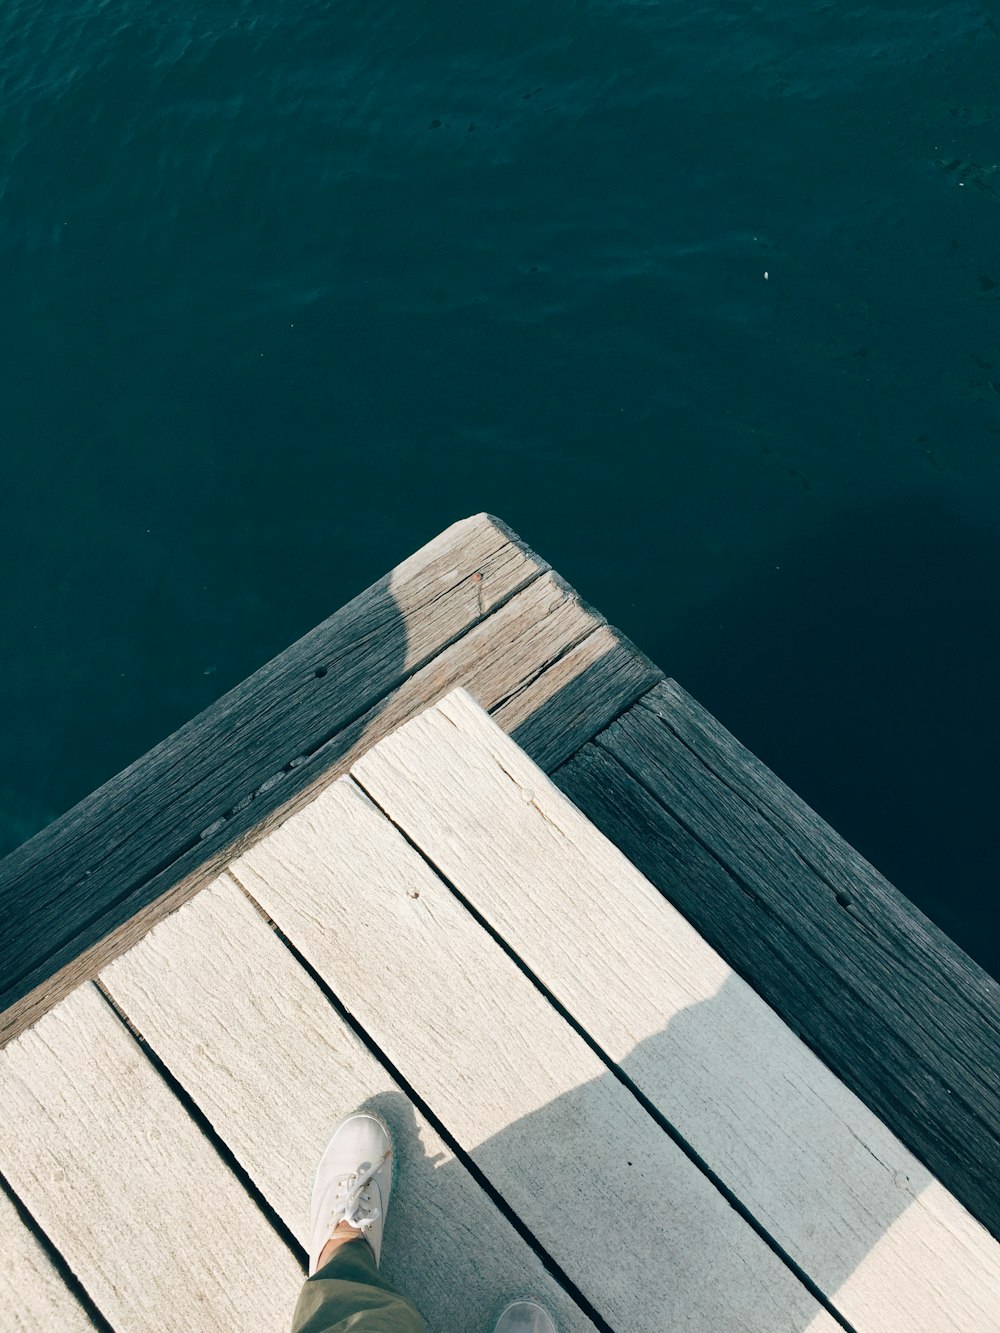 brown wooden dock on body of water